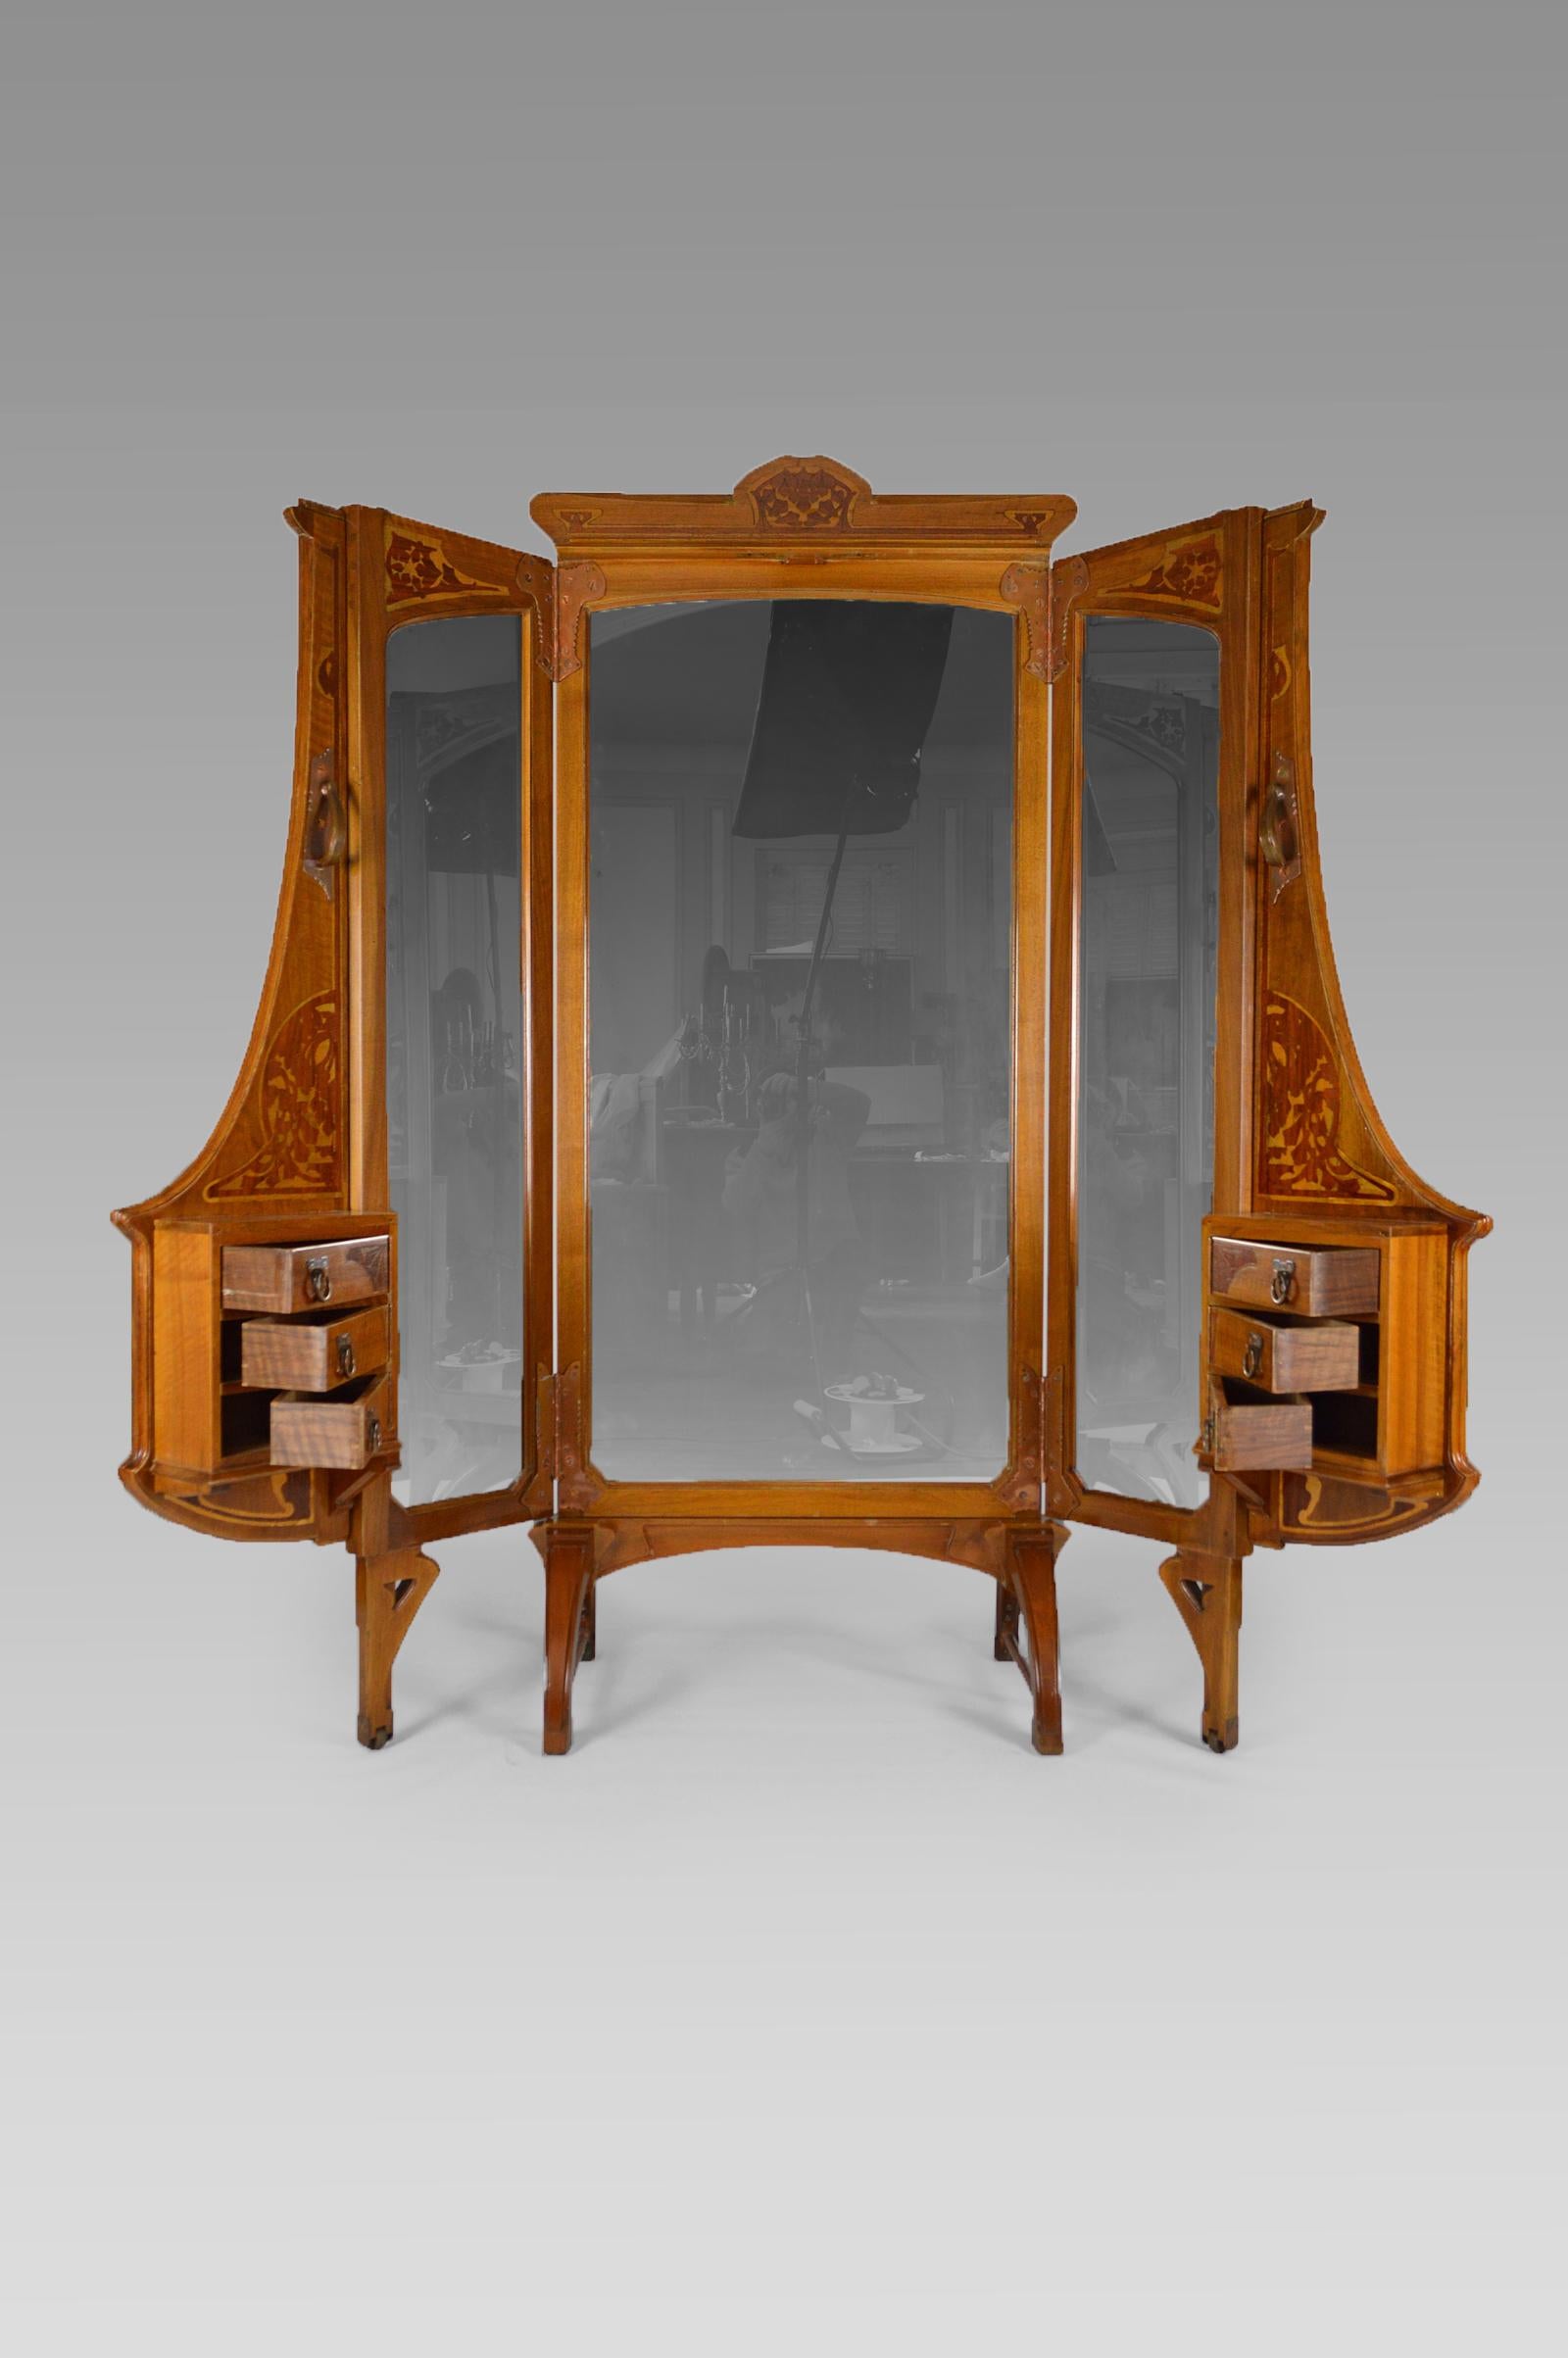 Exceptional dressing / vanity polyptych folding screen (5 panels).

Mahogany structure with inlays / marquetry of different essences with floral motifs.
Copper handles, hinges and pulls.
5 panels including 3 with mirrors and 2 with